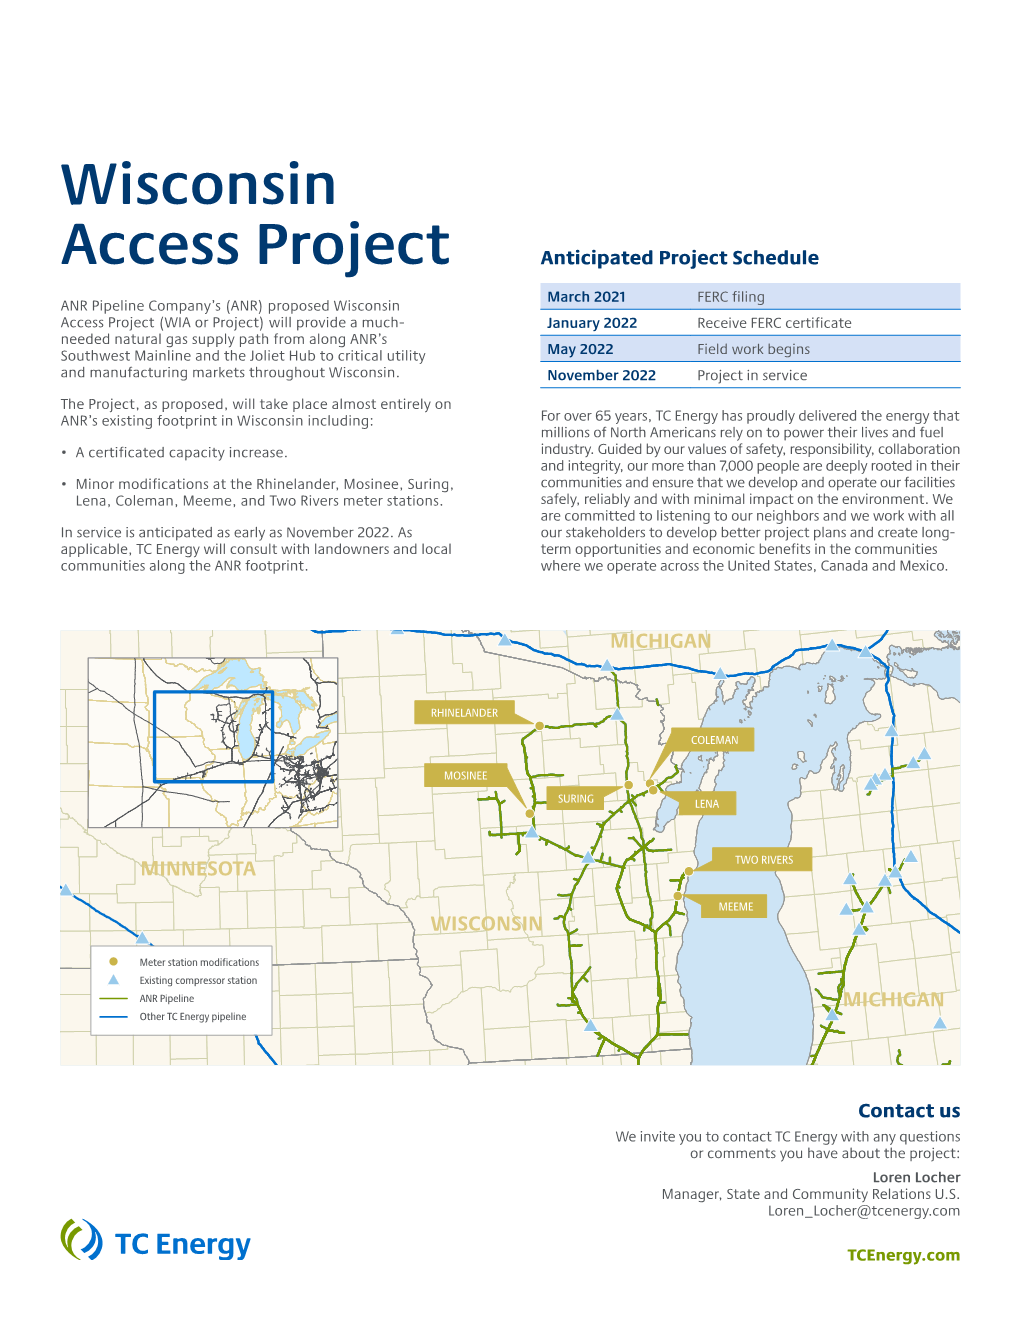 Wisconsin Access Project